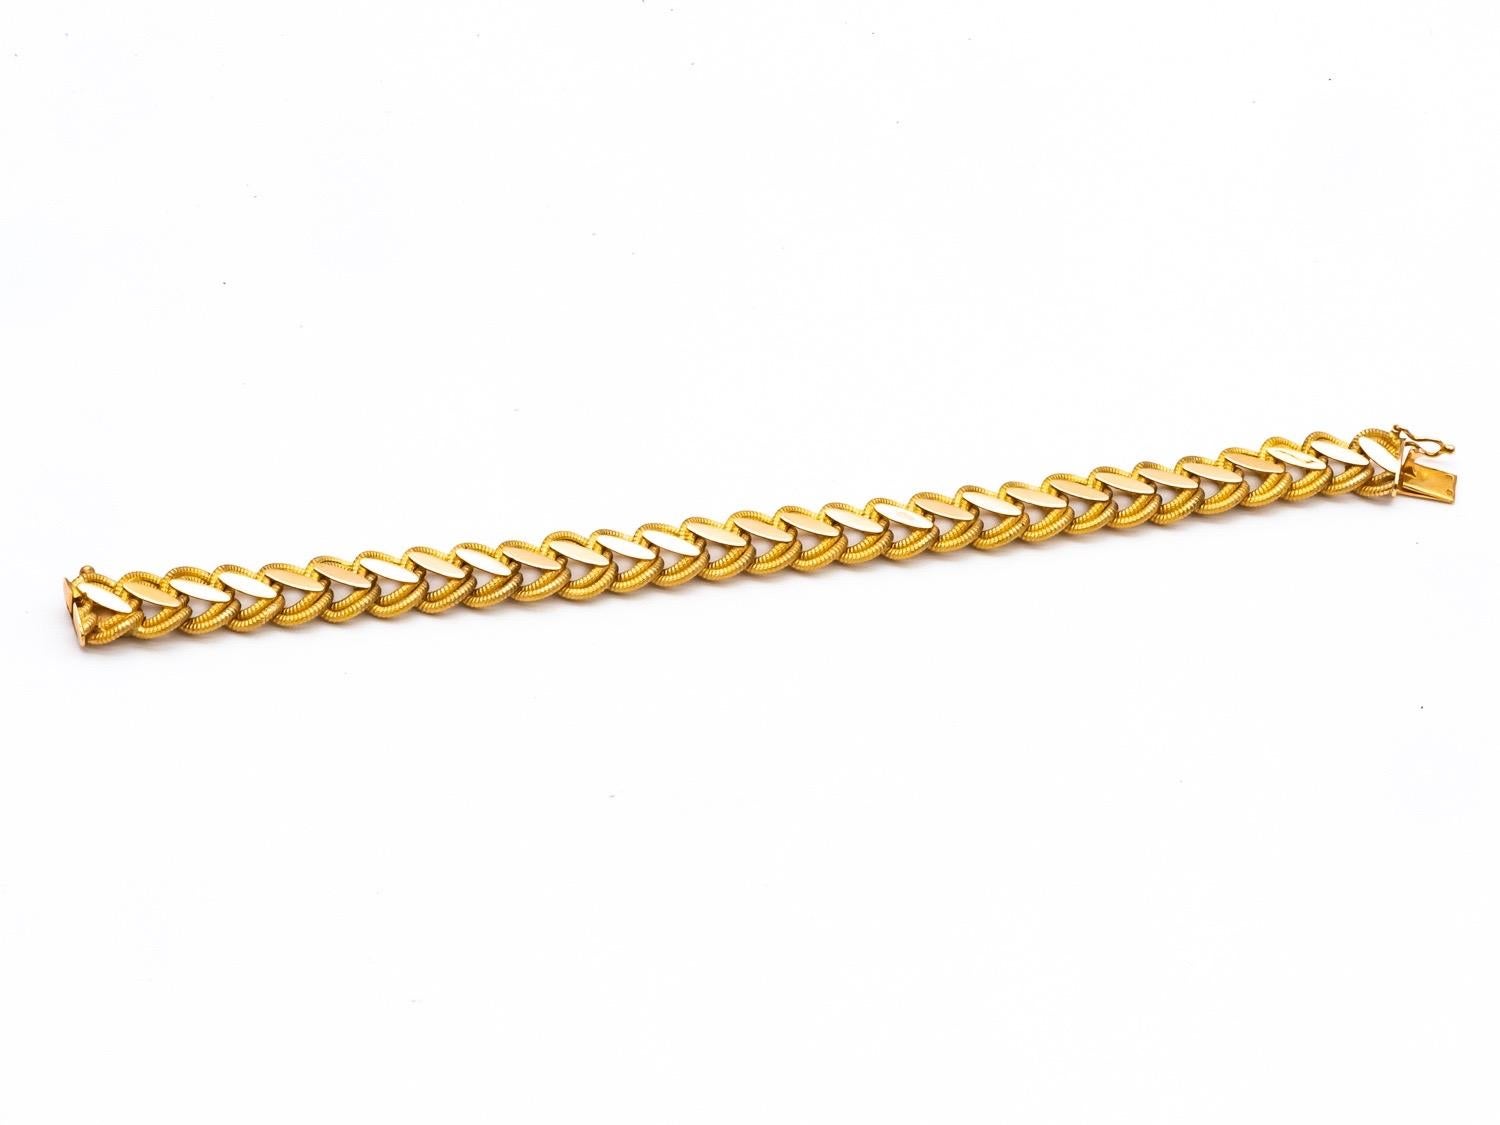 Bracelet Brushed Shiny Mesh Year 1960 Yellow Gold 18 Karat In Excellent Condition For Sale In Vannes, FR